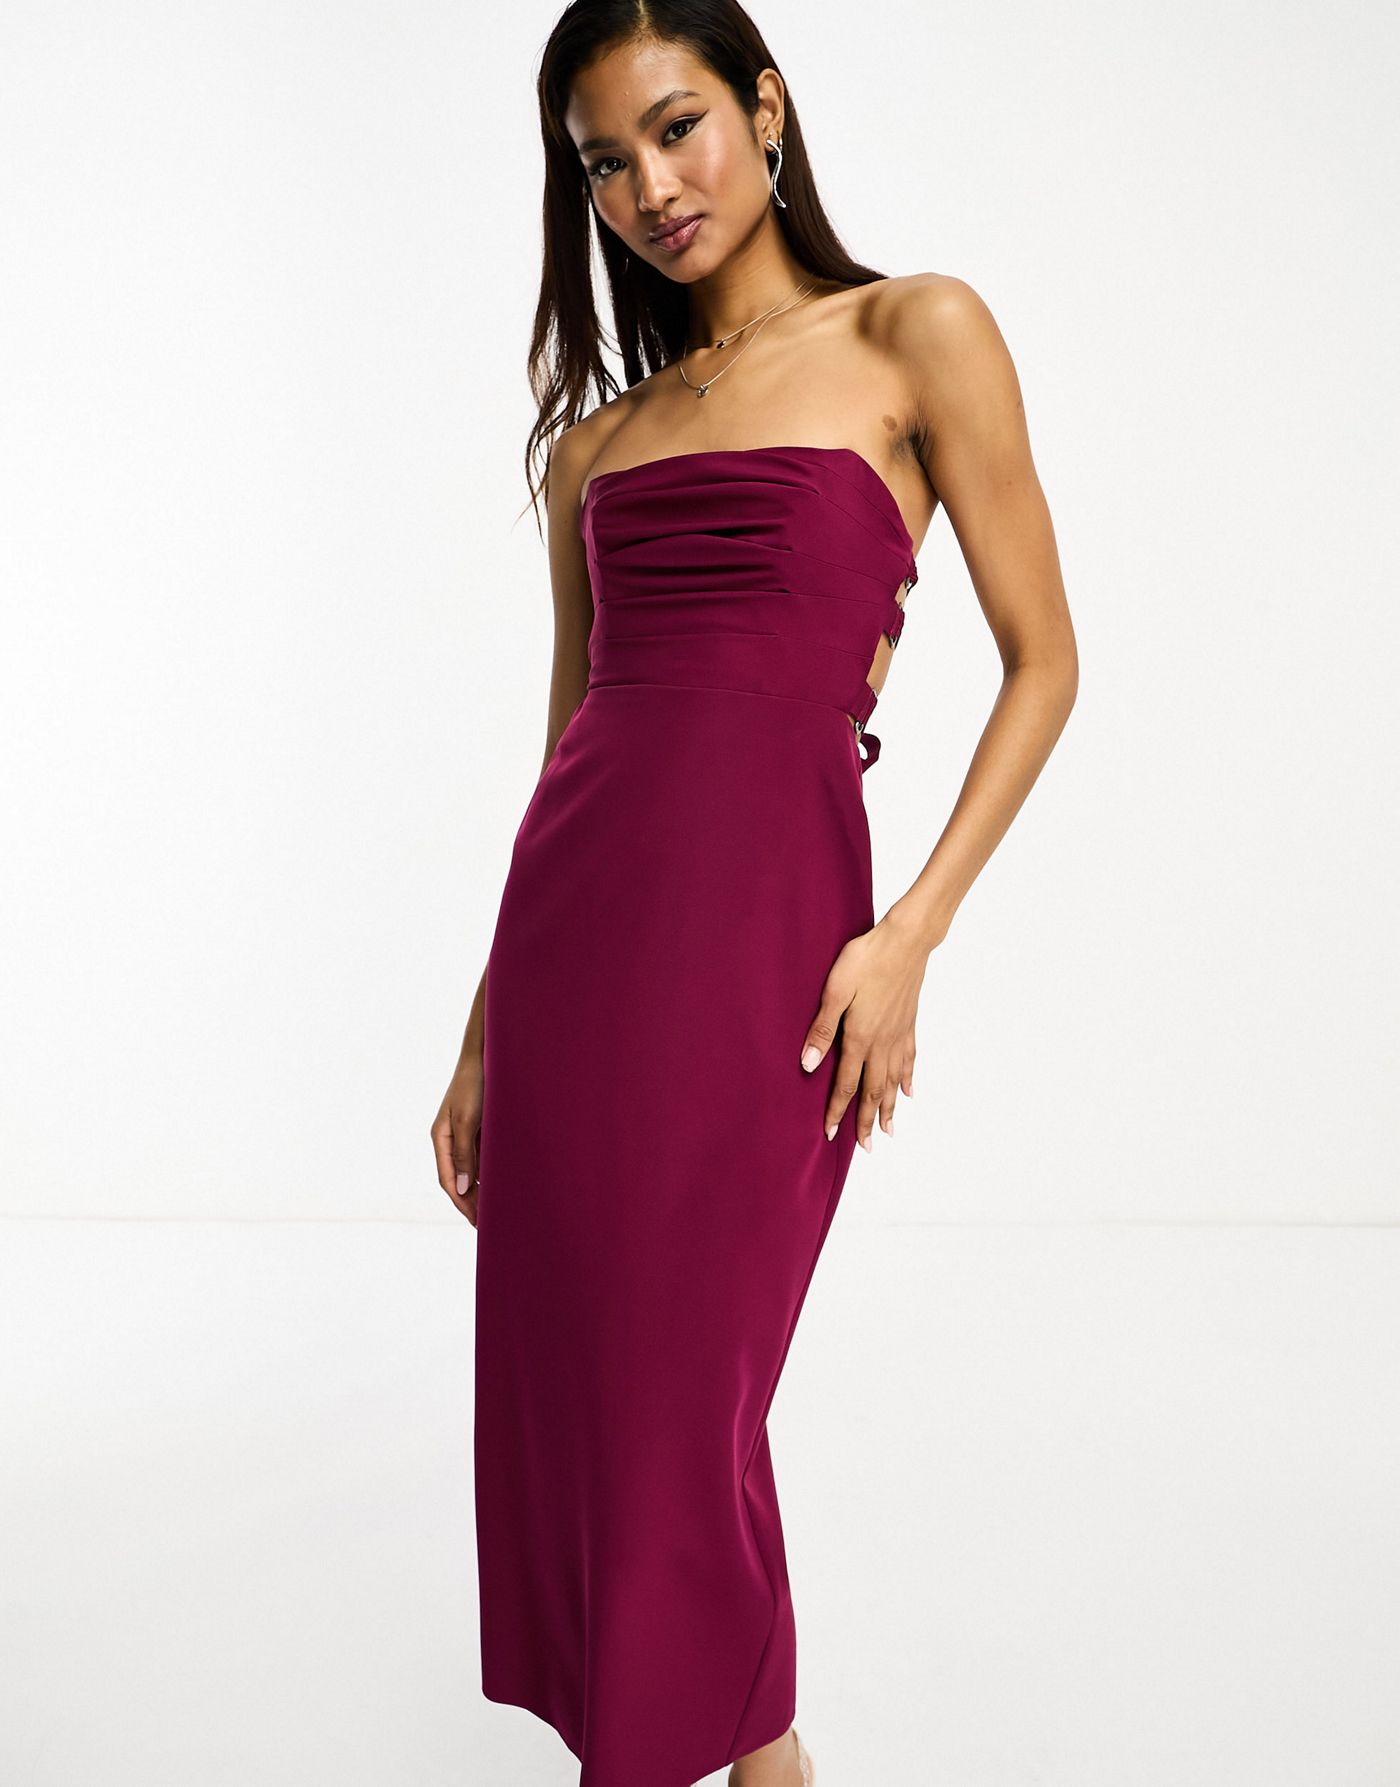 ASOS DESIGN pleat bandeau midi dress with lace up back detail in purple